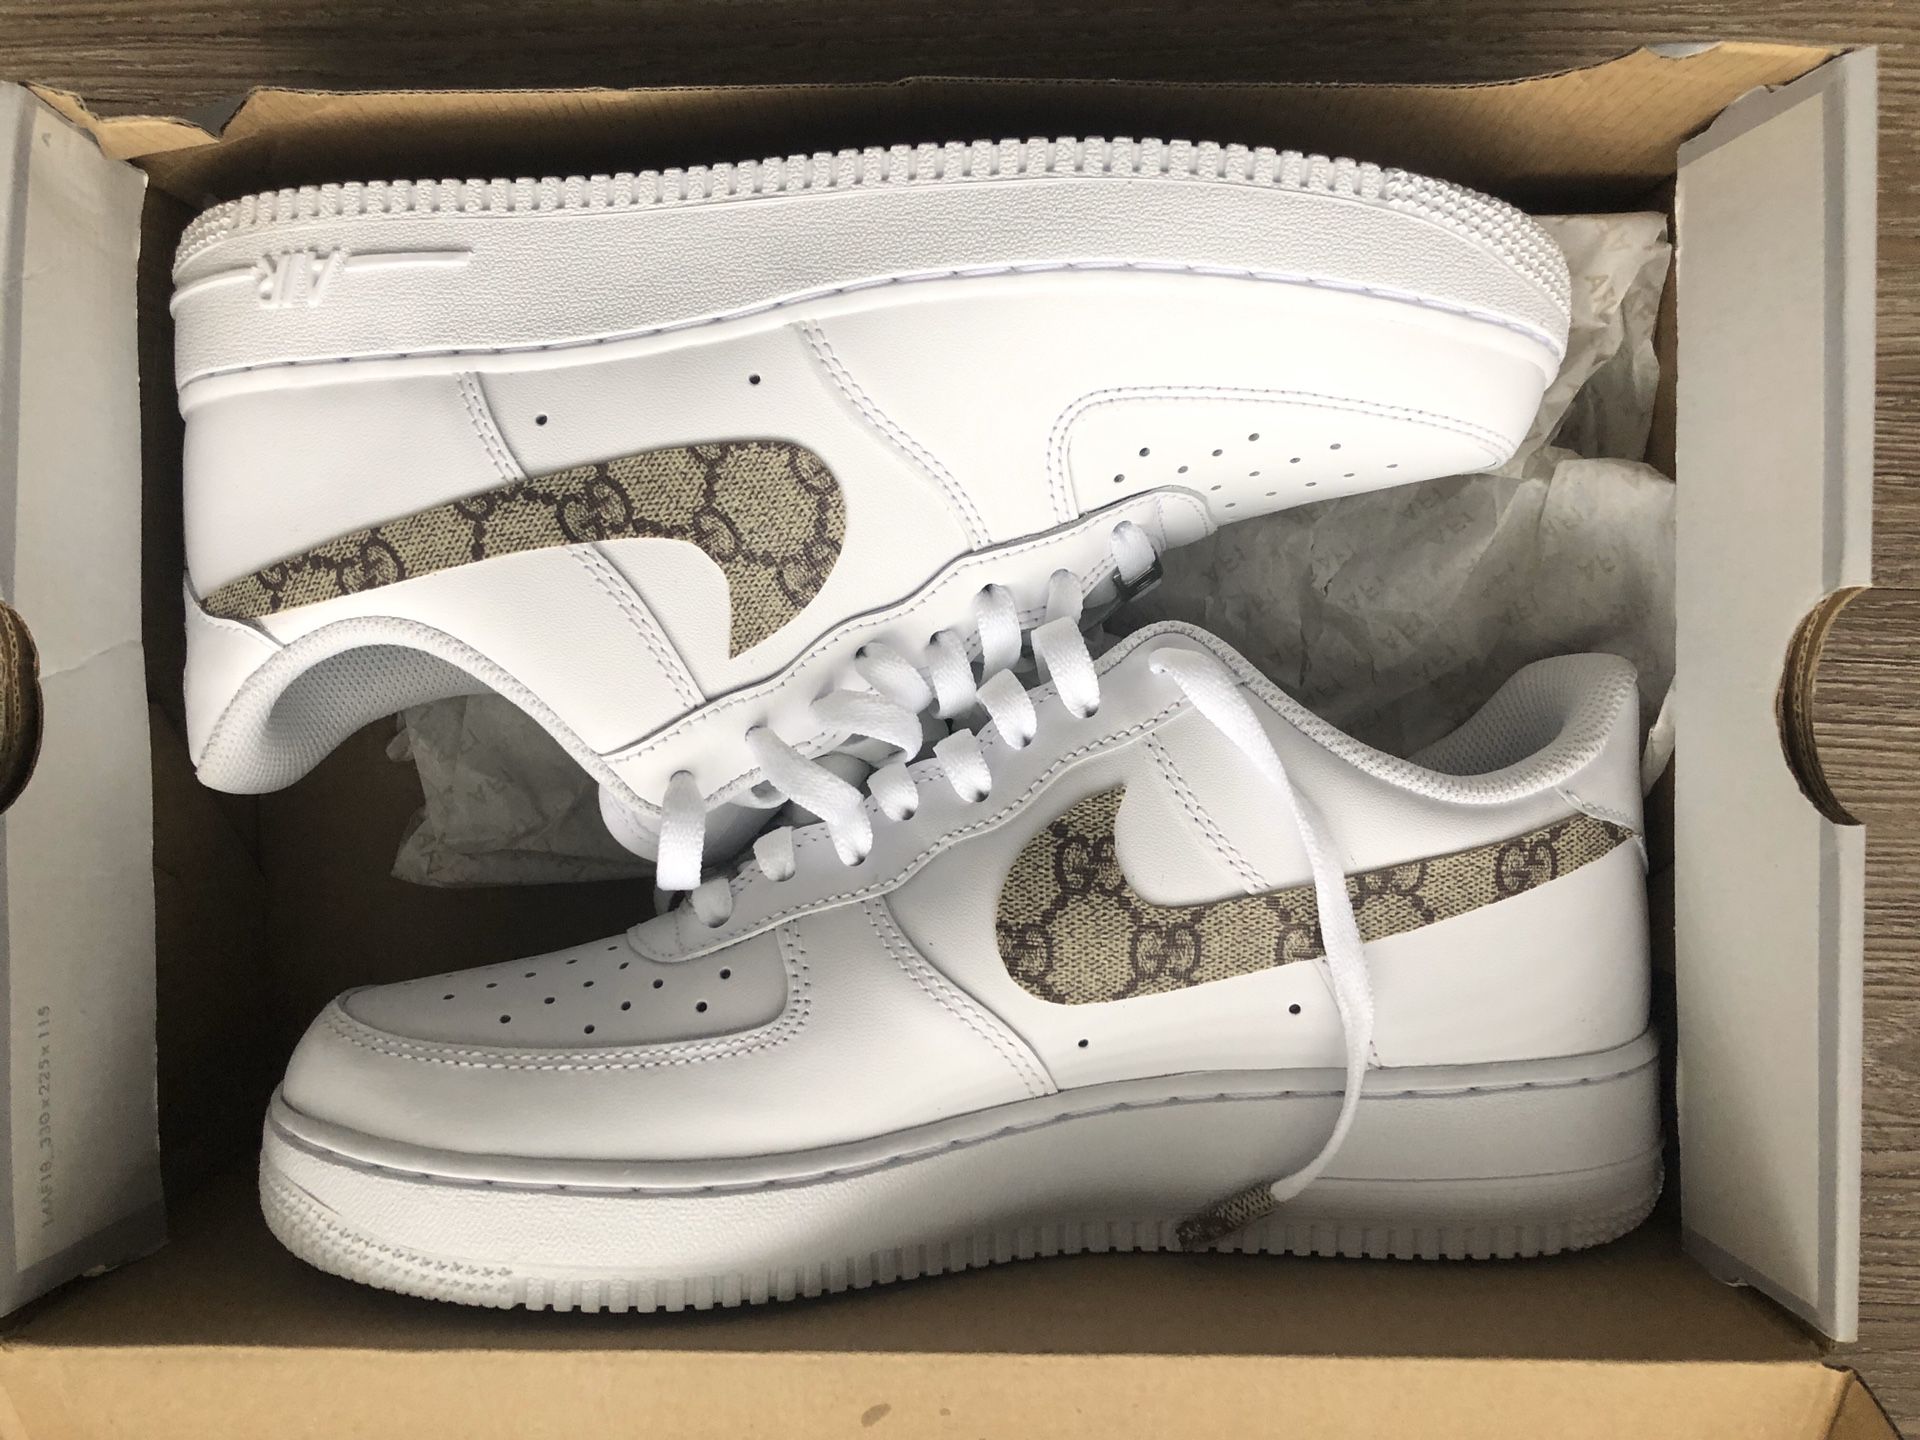 Custom Gucci Nike Air Force 1's size 9. All sizes available